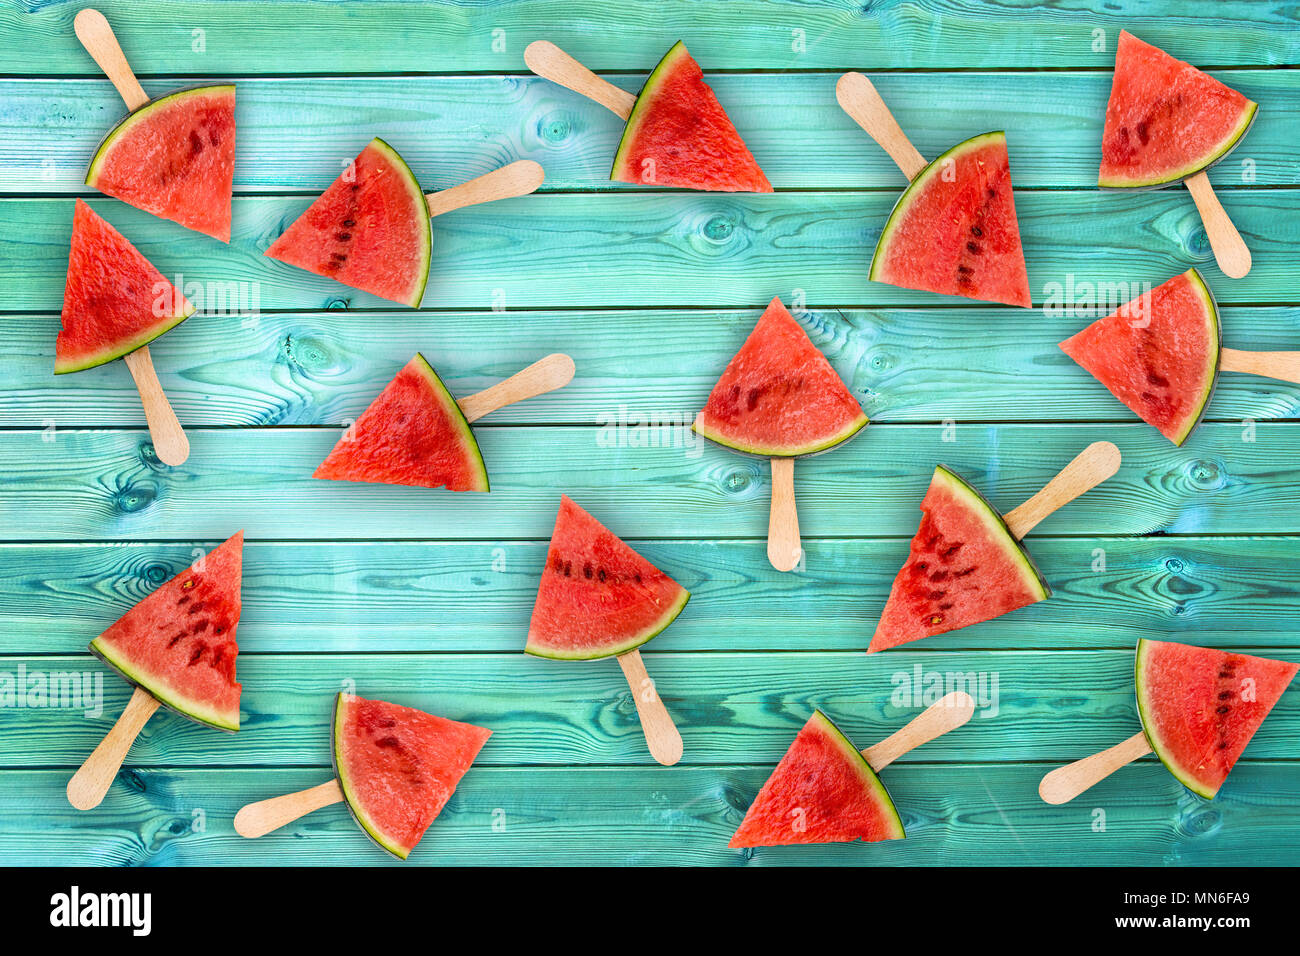 Watermelon slice popsicles on blue wood background, fresh summer fruit concept Stock Photo